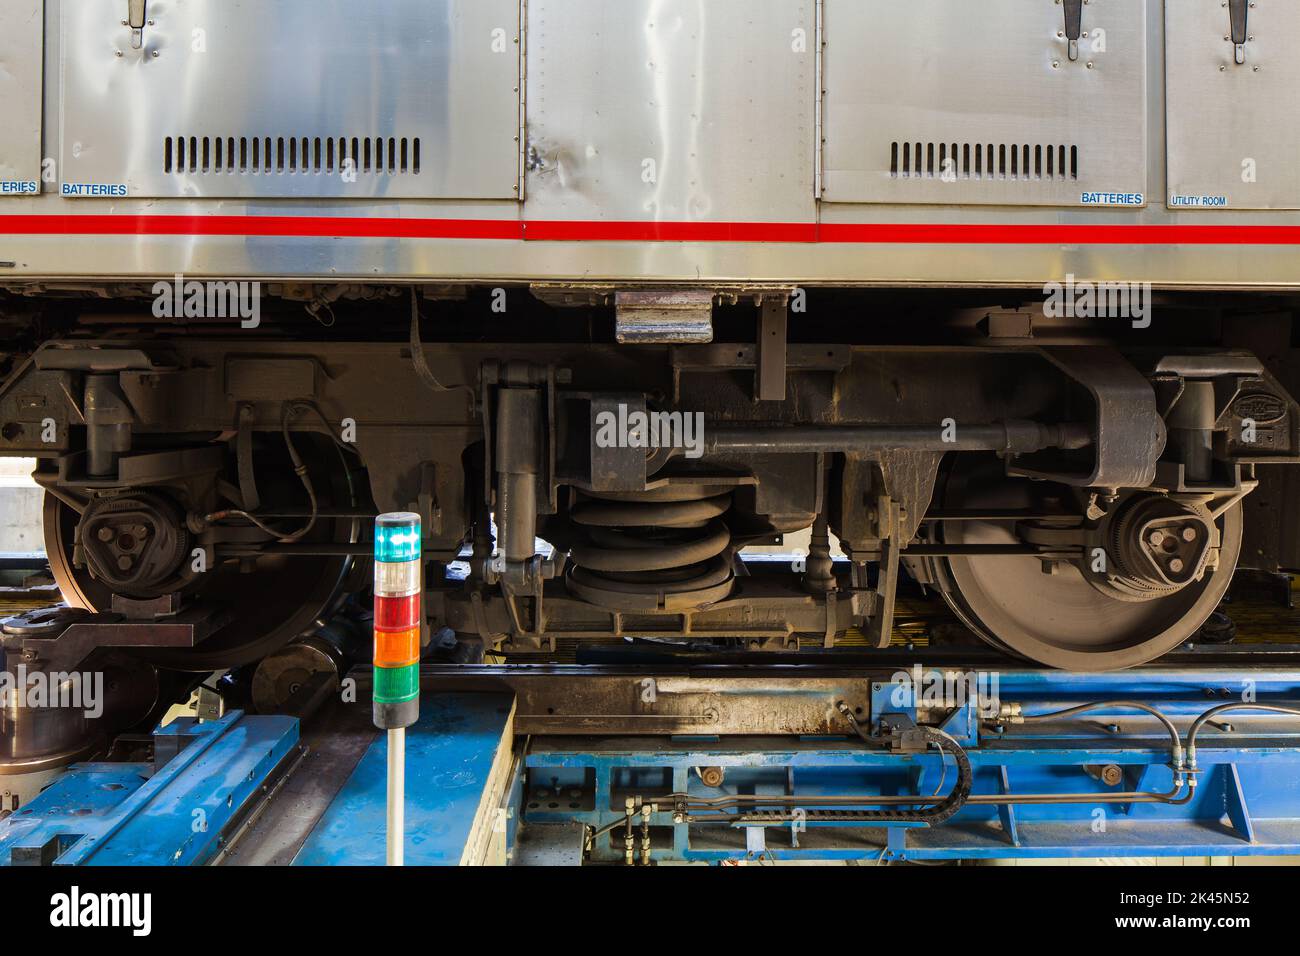 A train, the wheels and low section of a train carriage on rails. Stock Photo